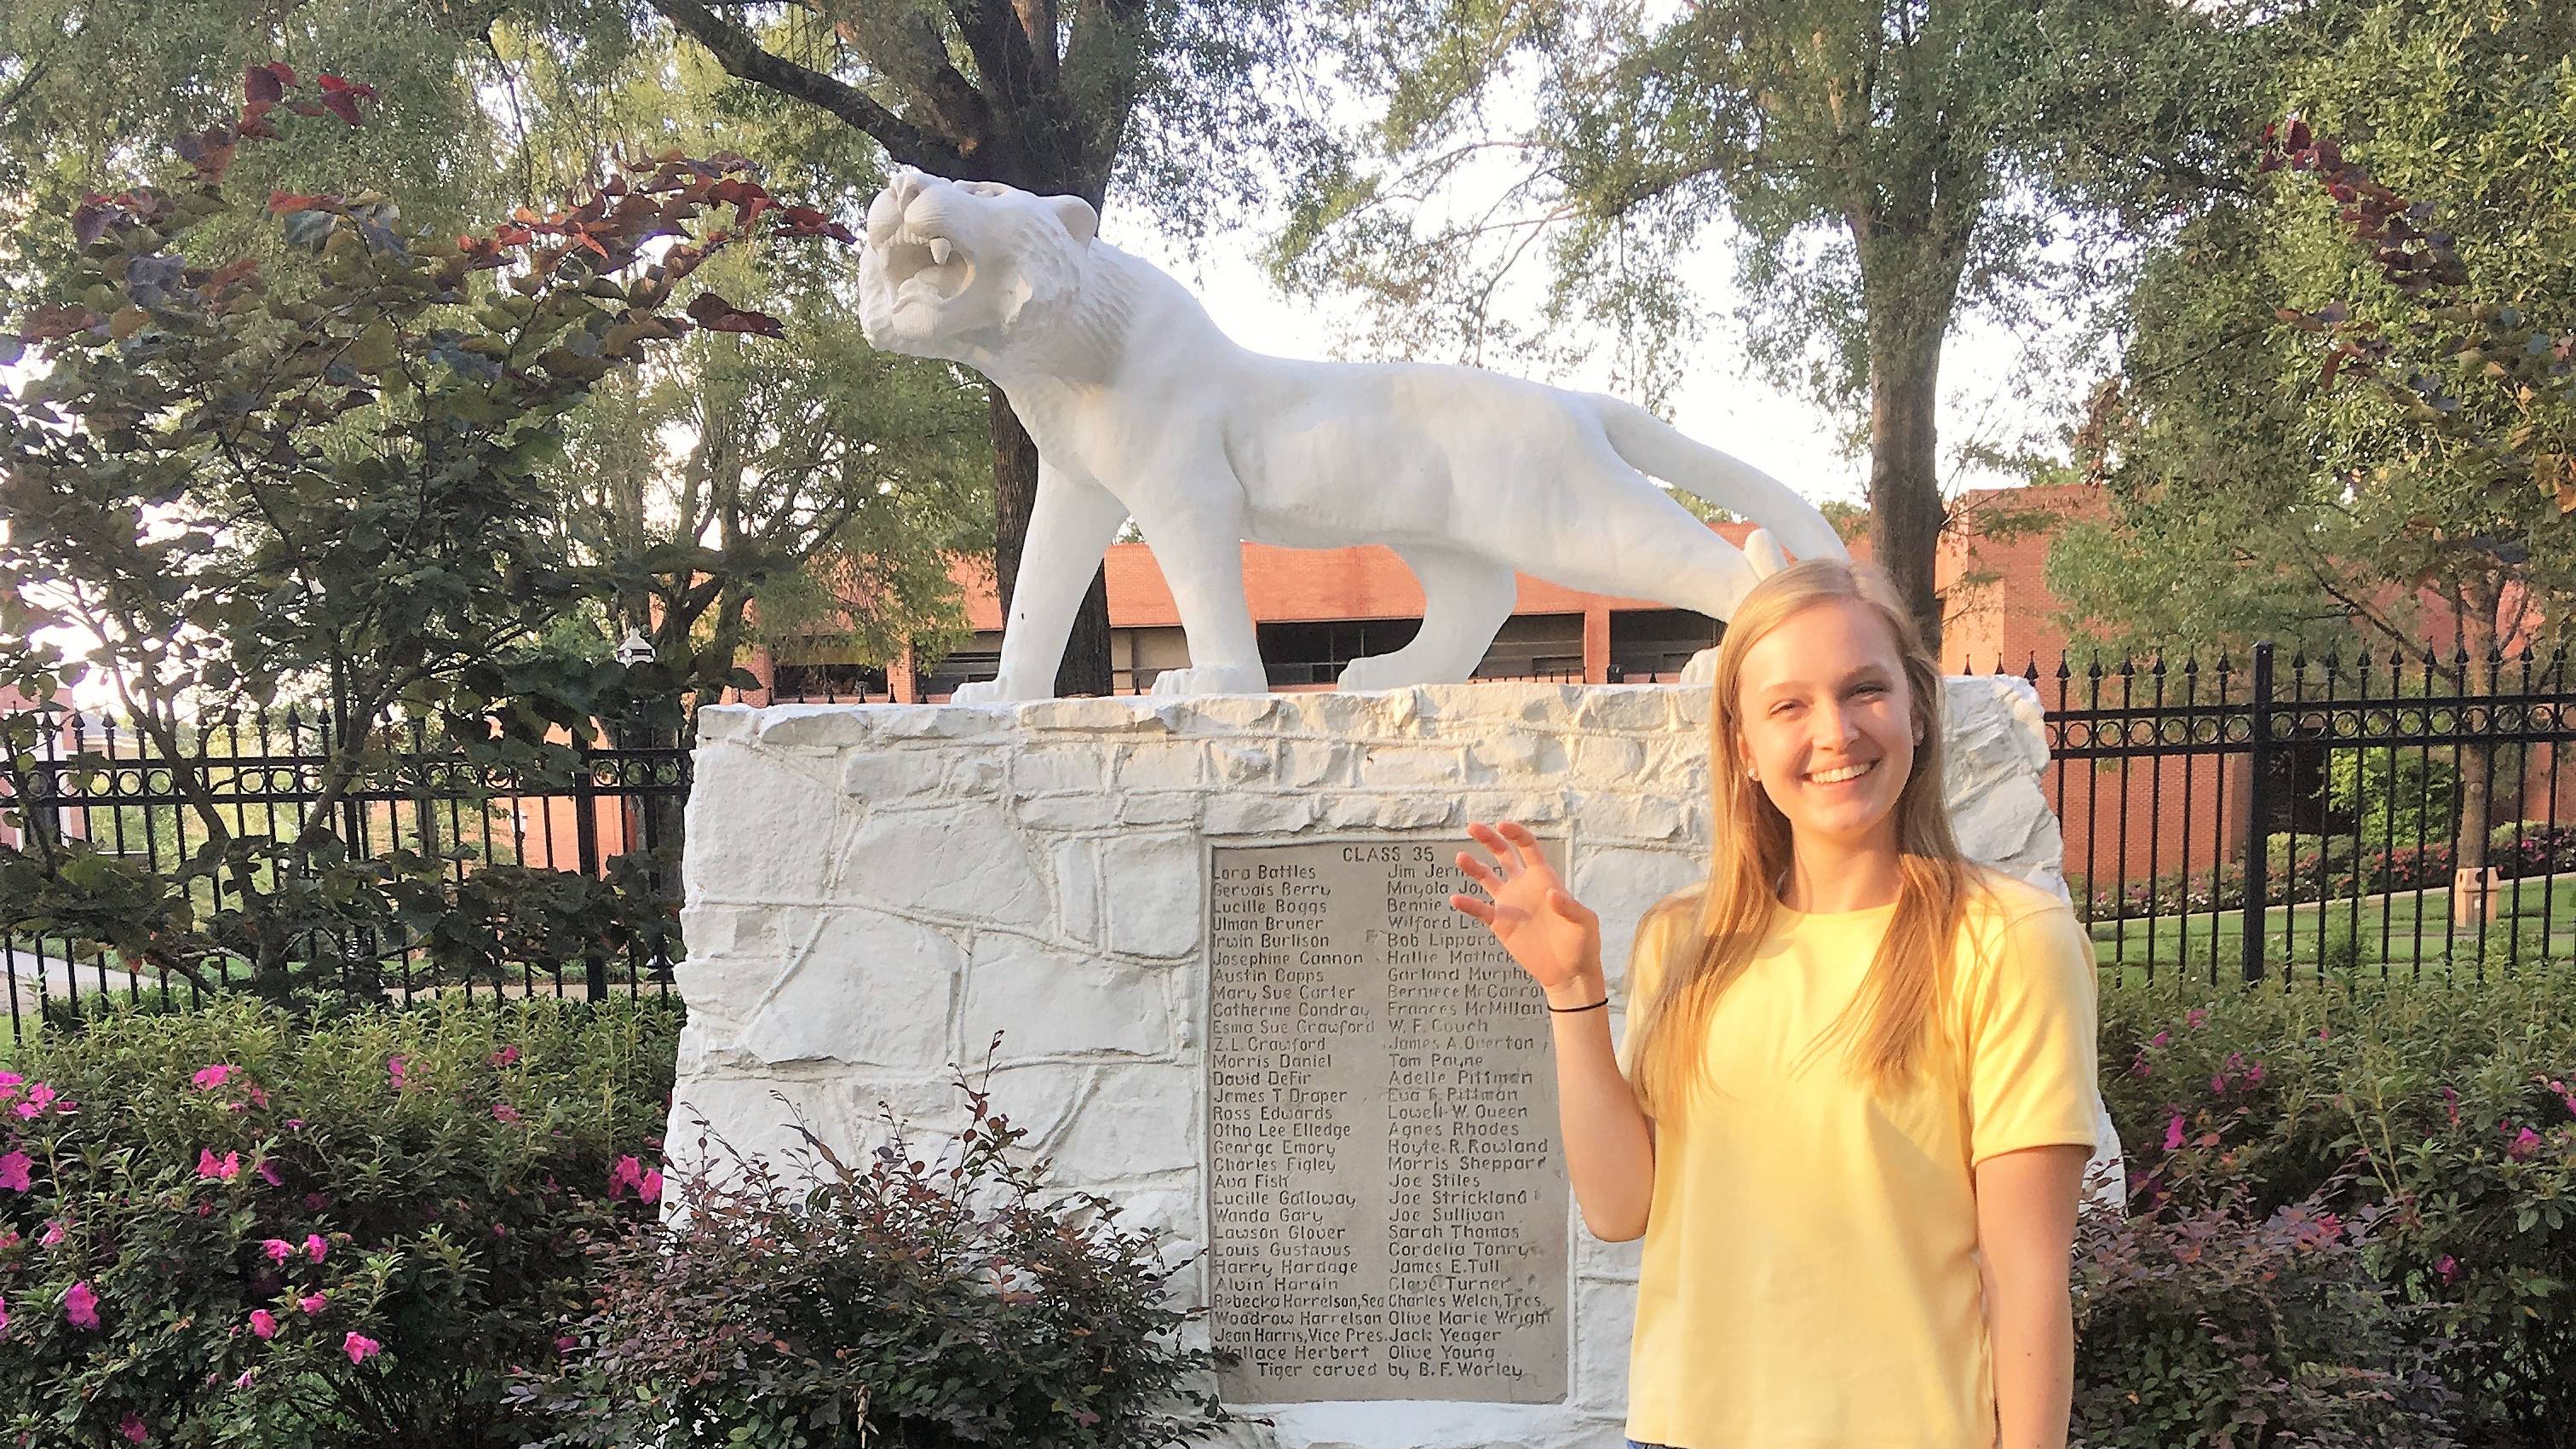 Shae poses with Ouachita's tiger statue